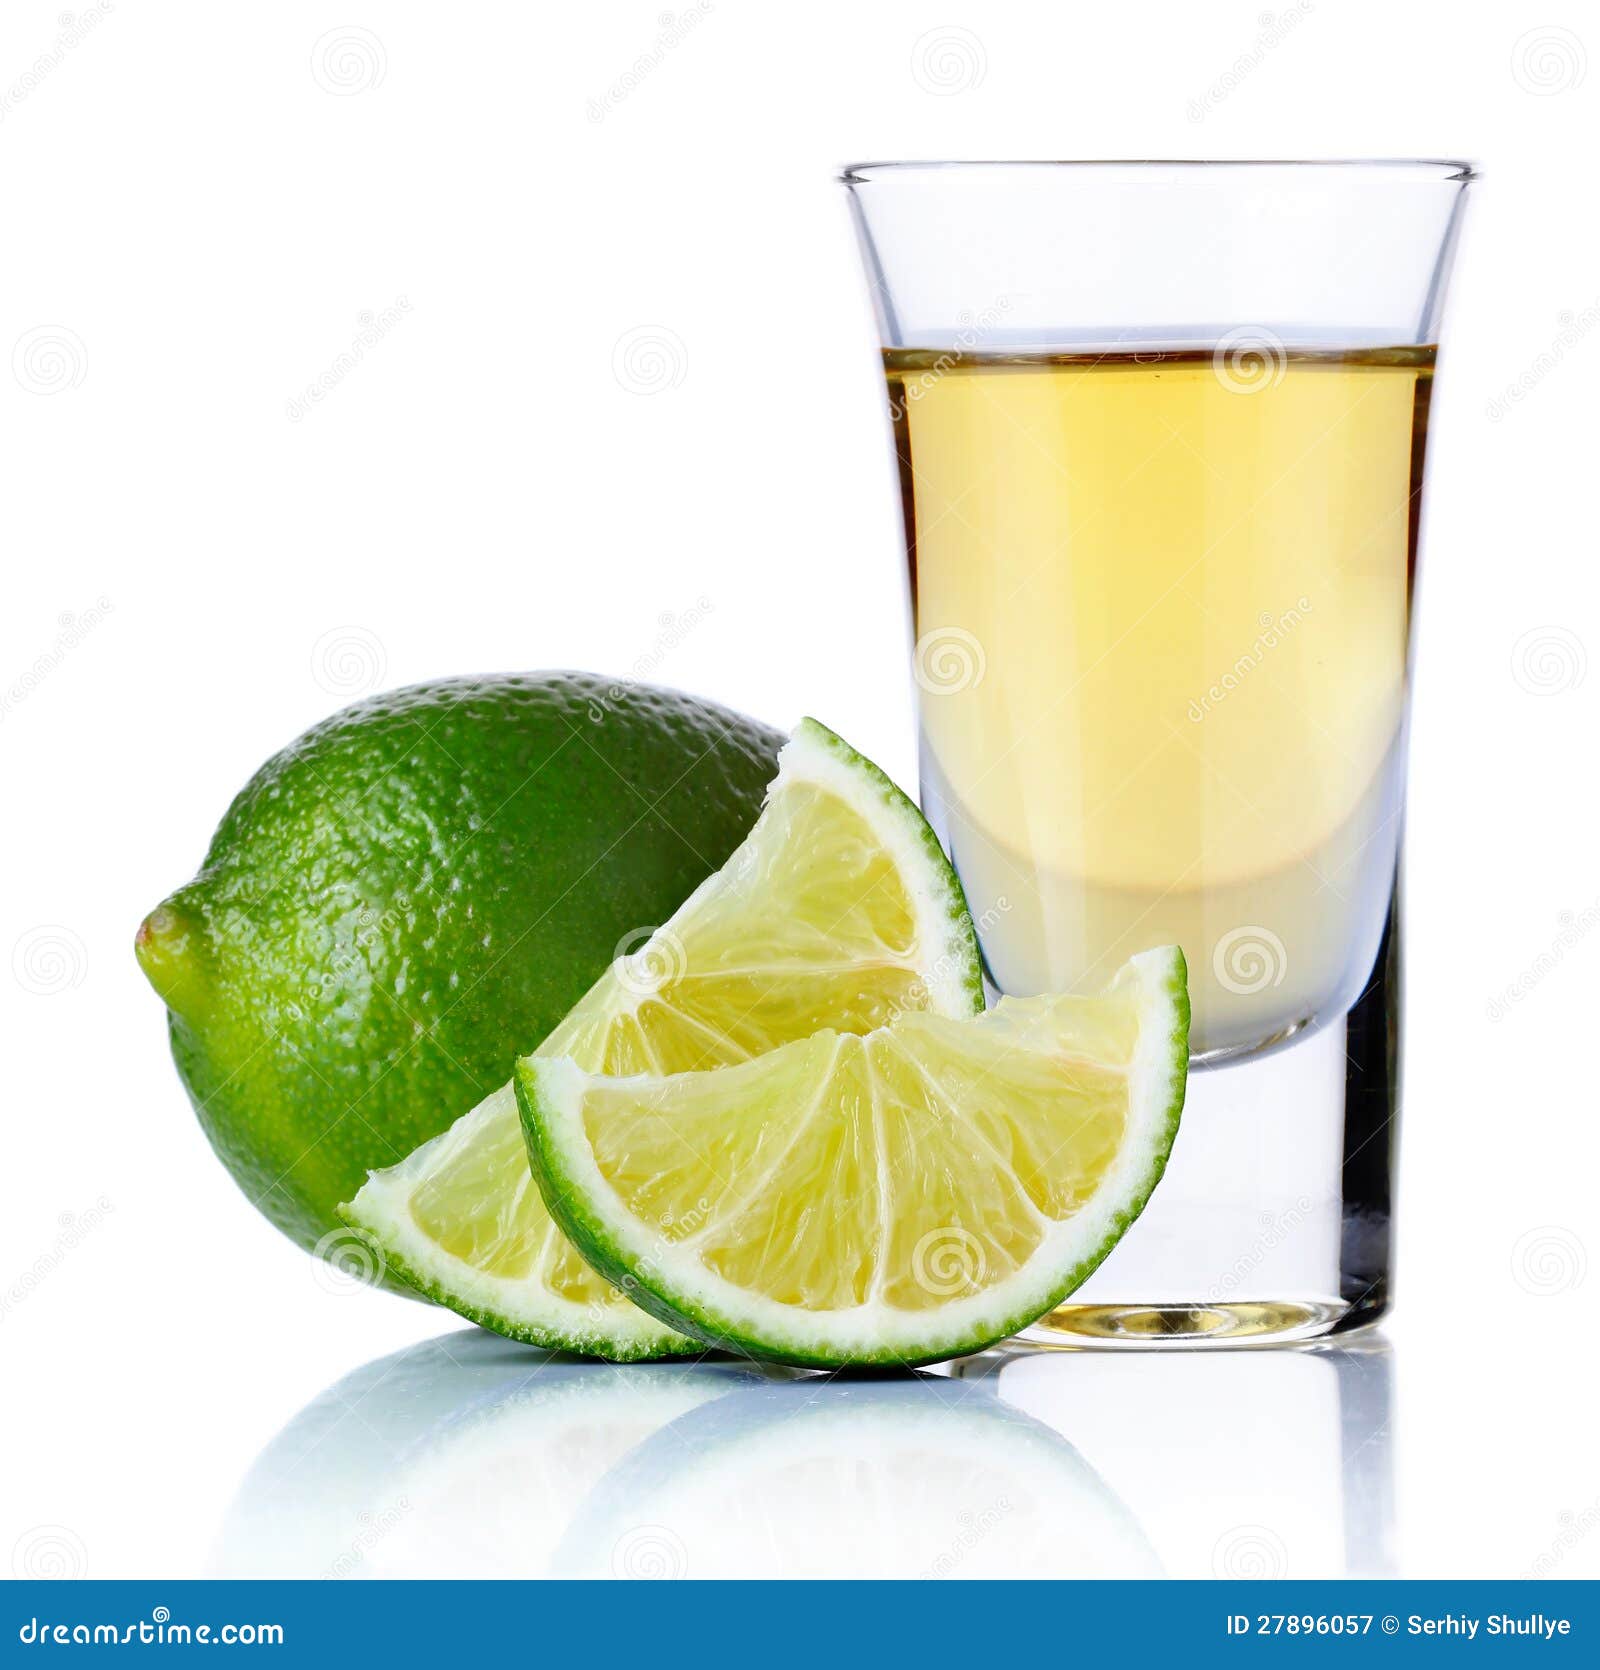 gold tequila shot with lime  on white